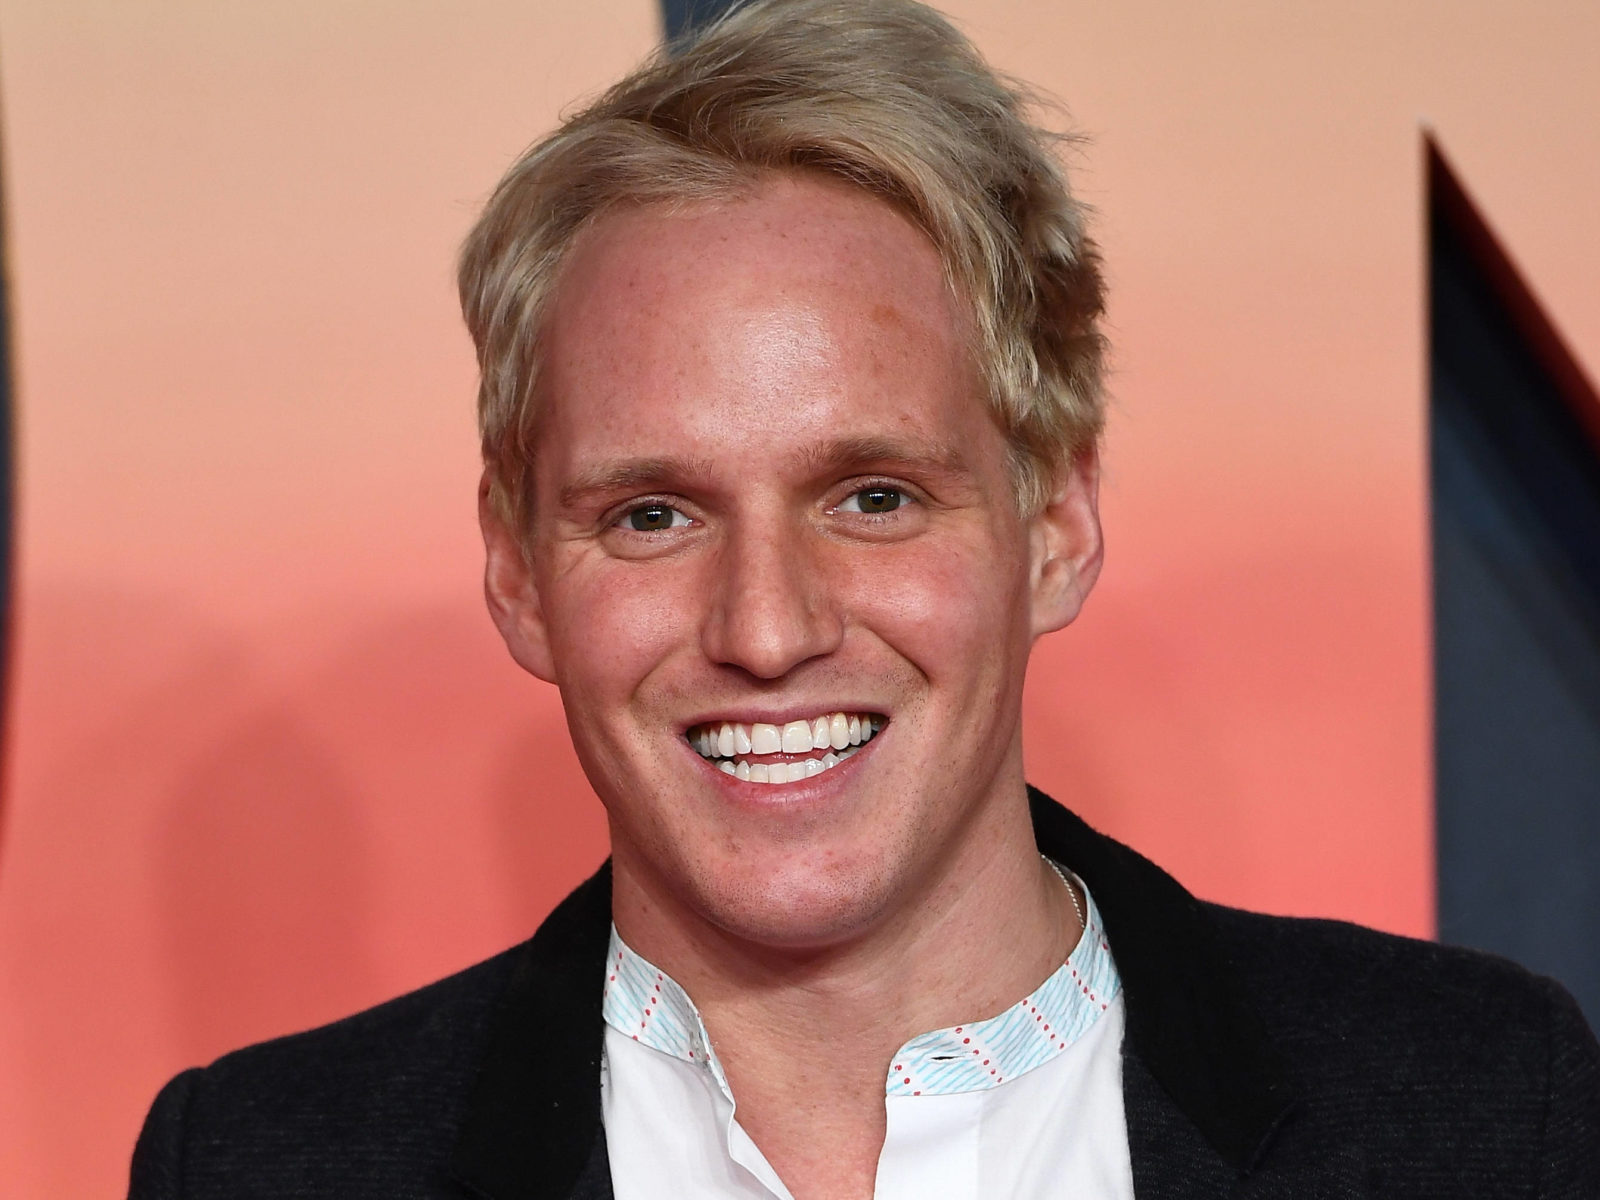 Jamie Laing, age 30, graces our screens now more than ever